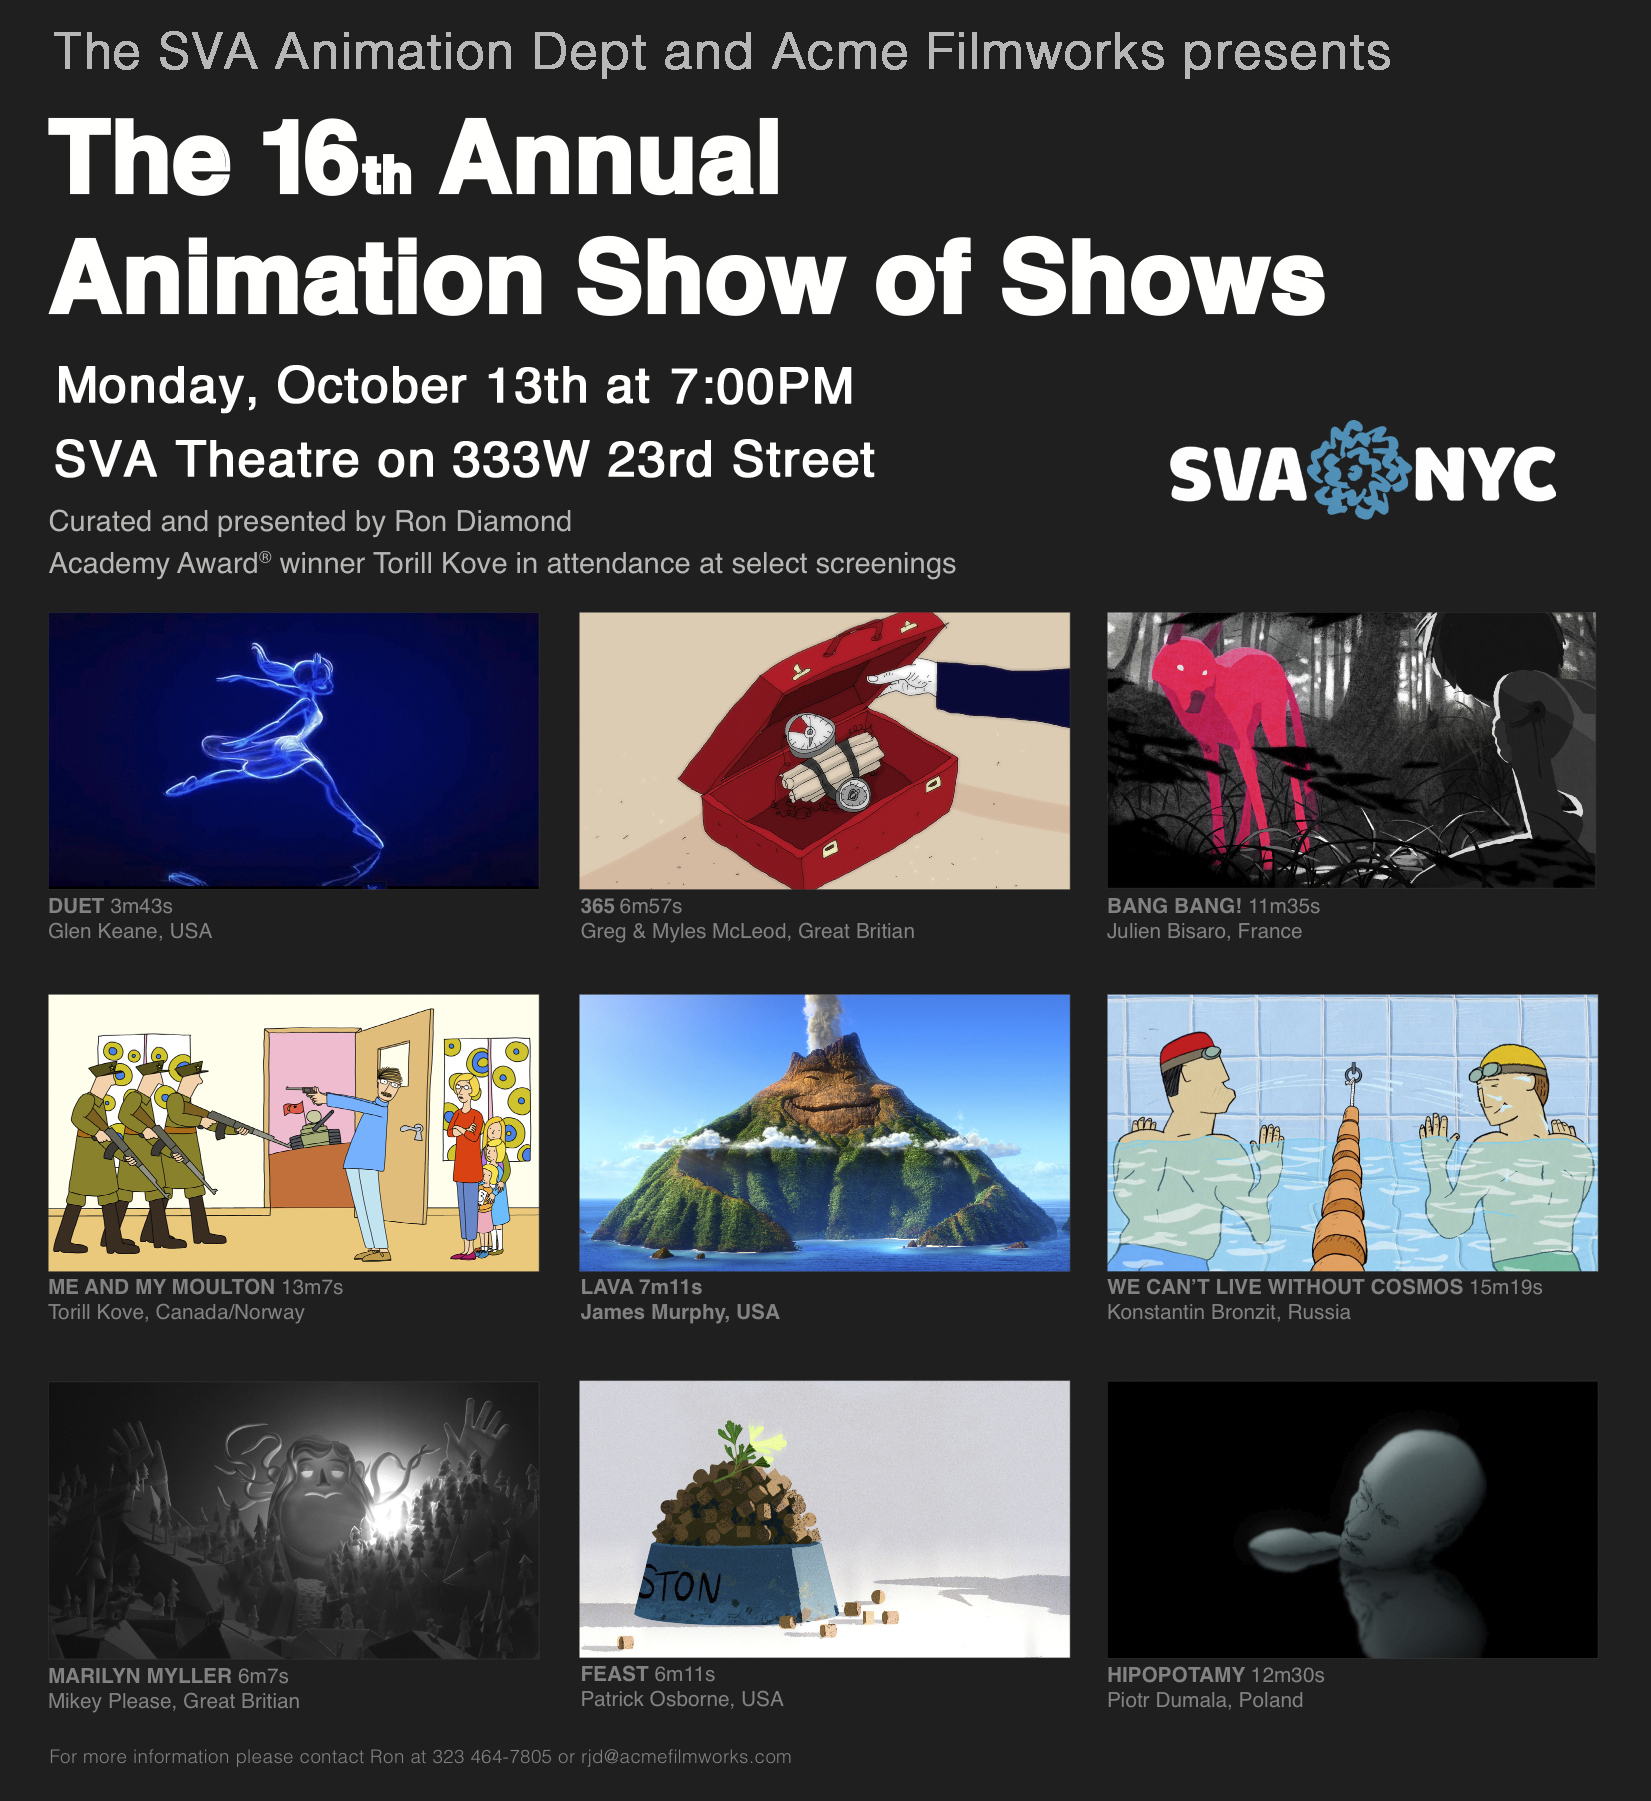 The 16th Annual Animation Show of Shows Art, Media, & Technology